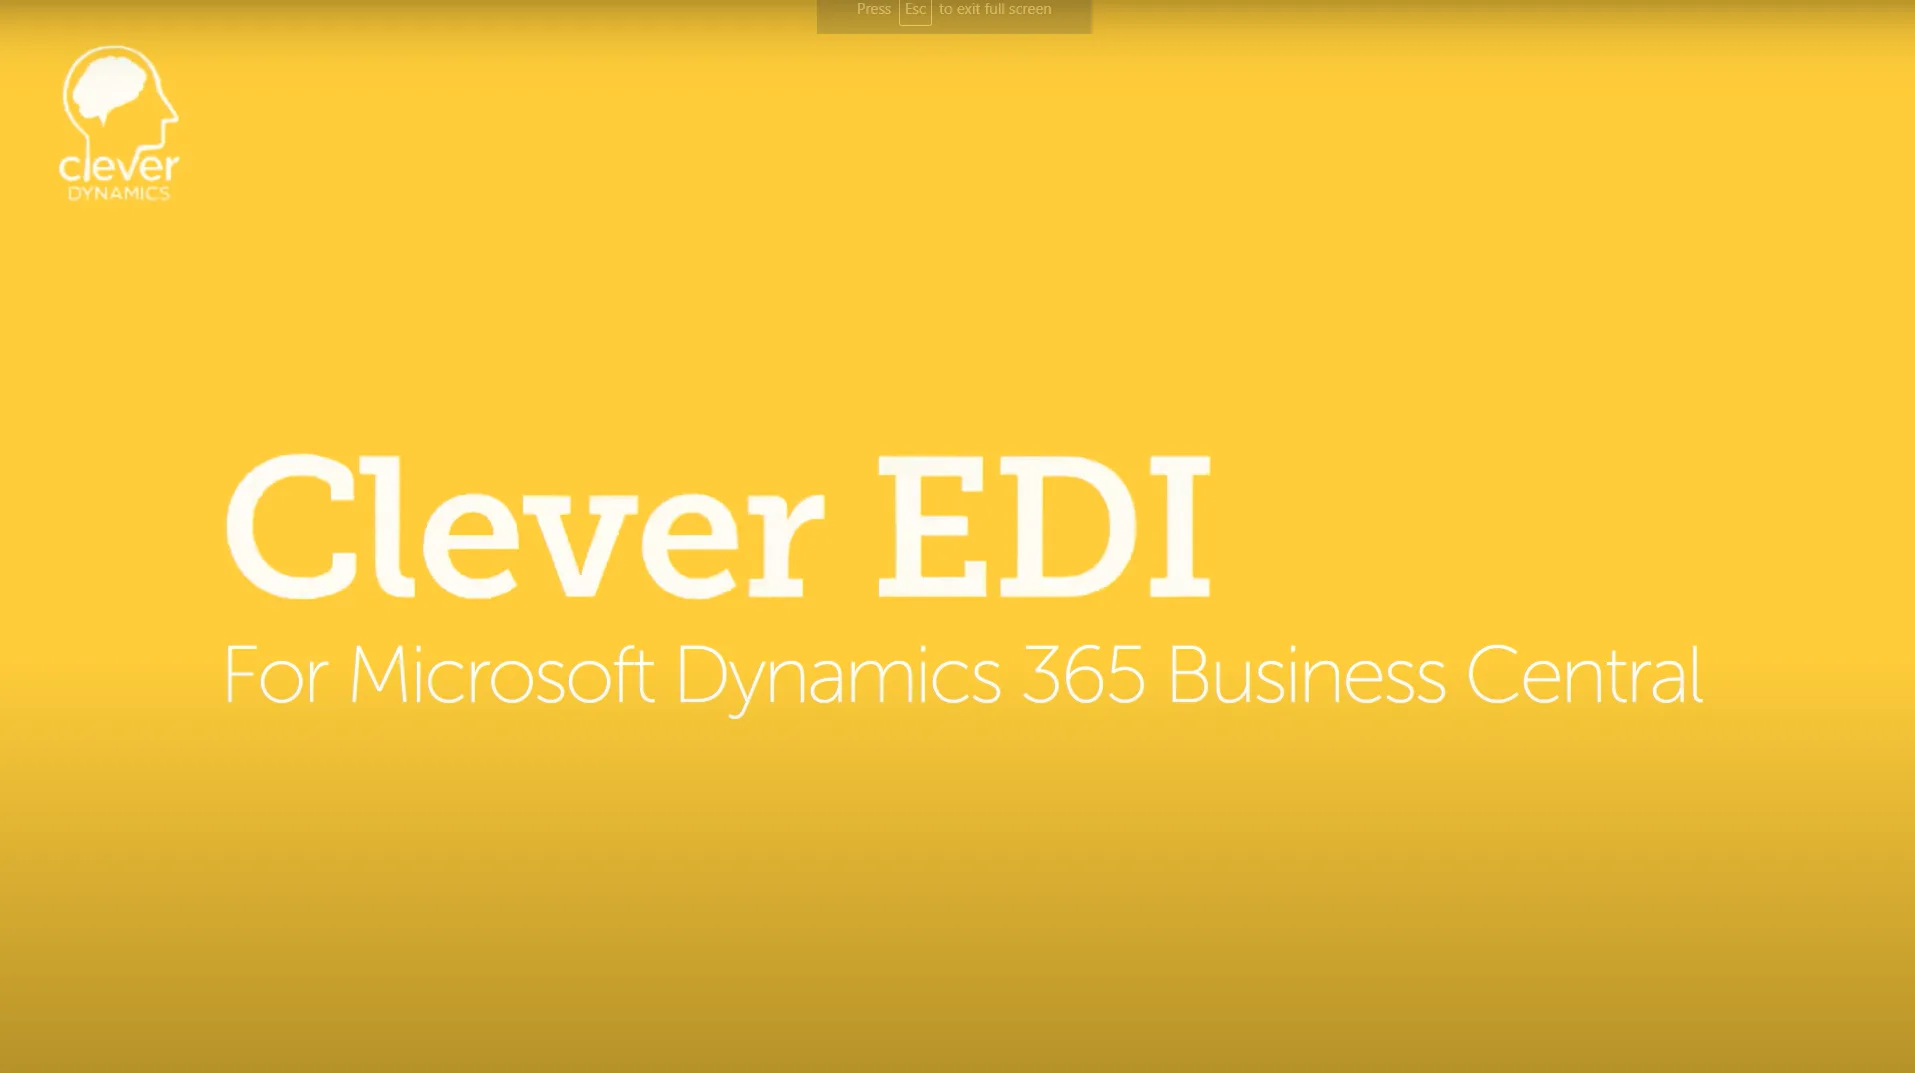 Clever EDI by Clever Dynamics for Dynamics 365